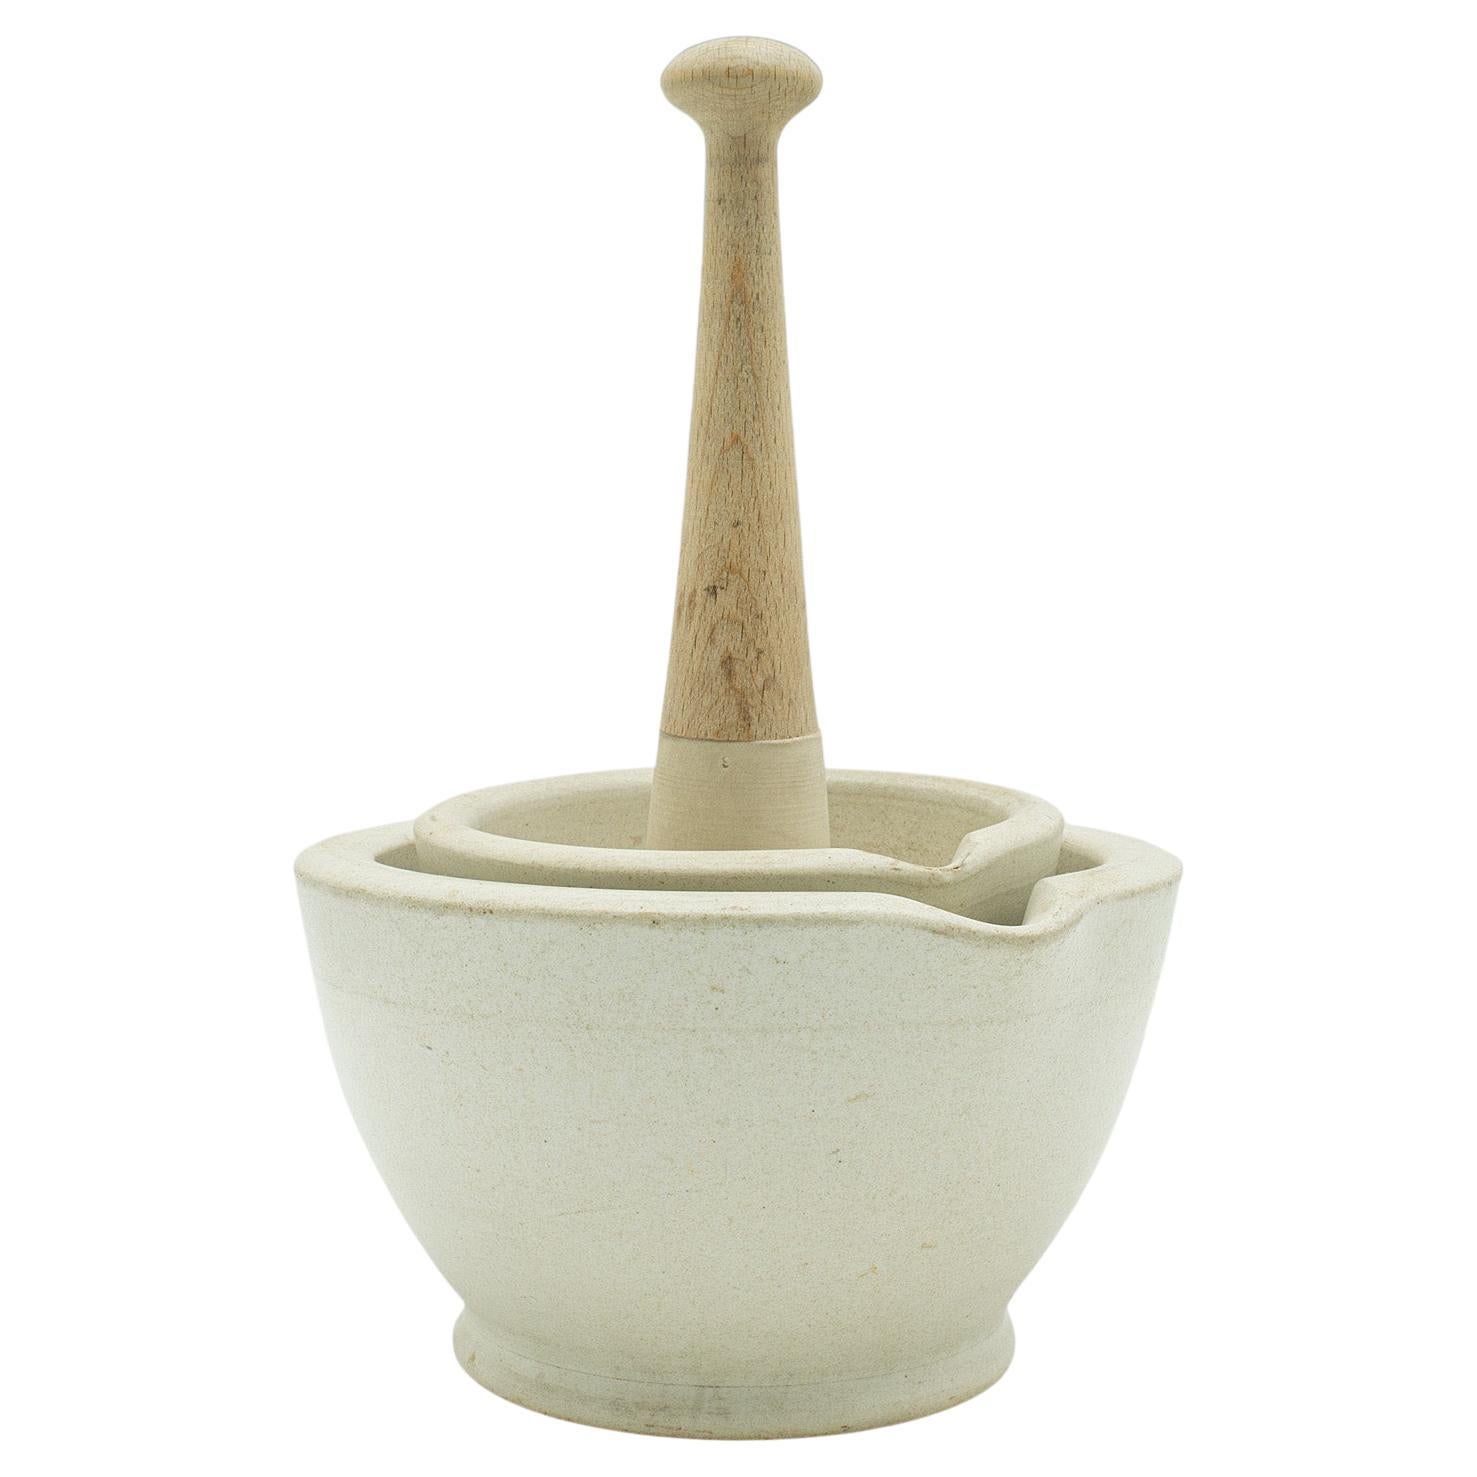 Small Antique Mortar & Pestle Duo, English, Ceramic, Beech, Cookery, Victorian For Sale